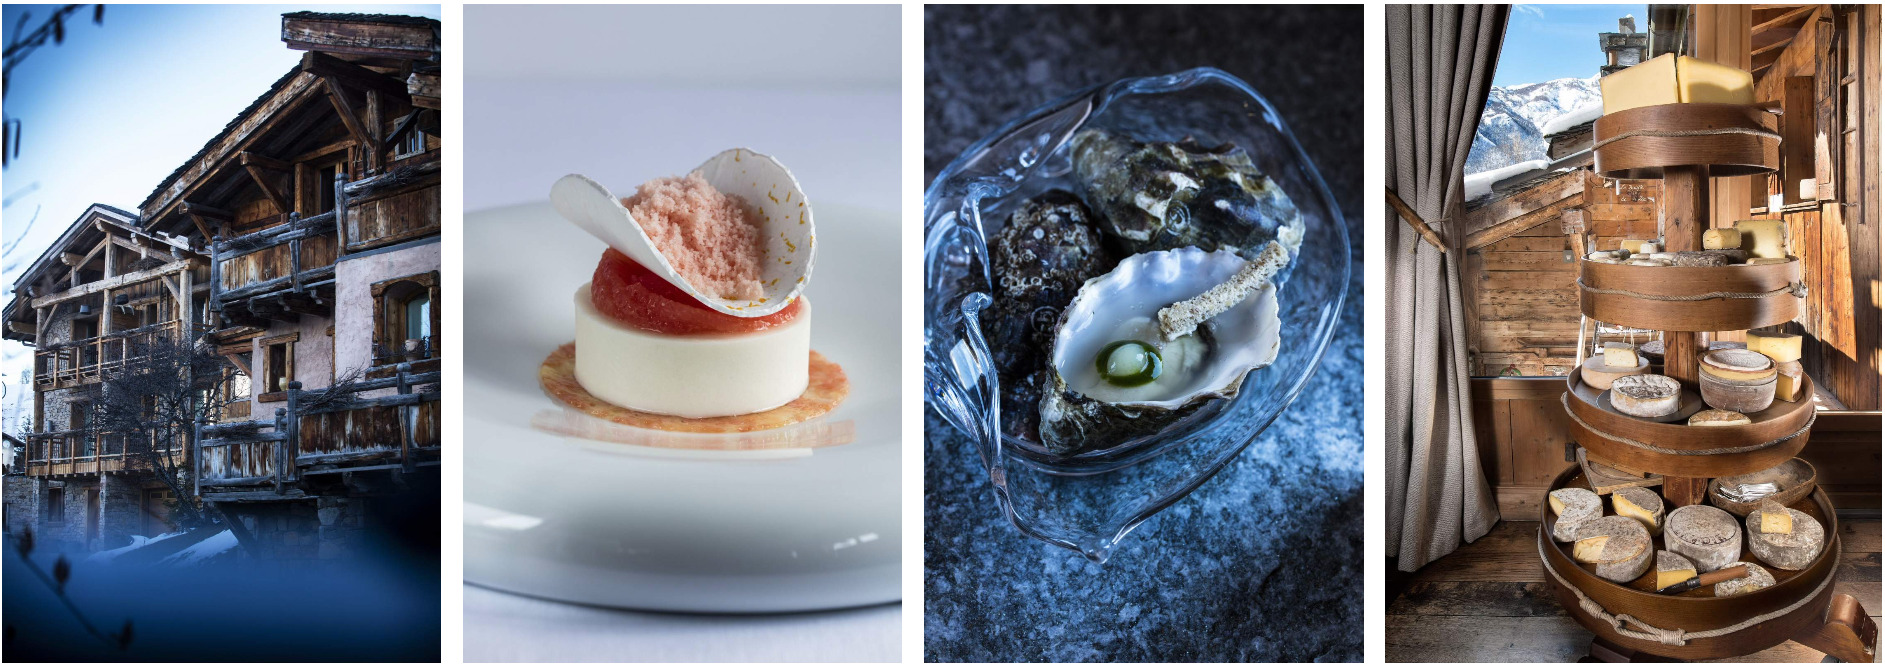 Photos of what the ***Michelin star restaurant 'La Bouitte' has on offer.